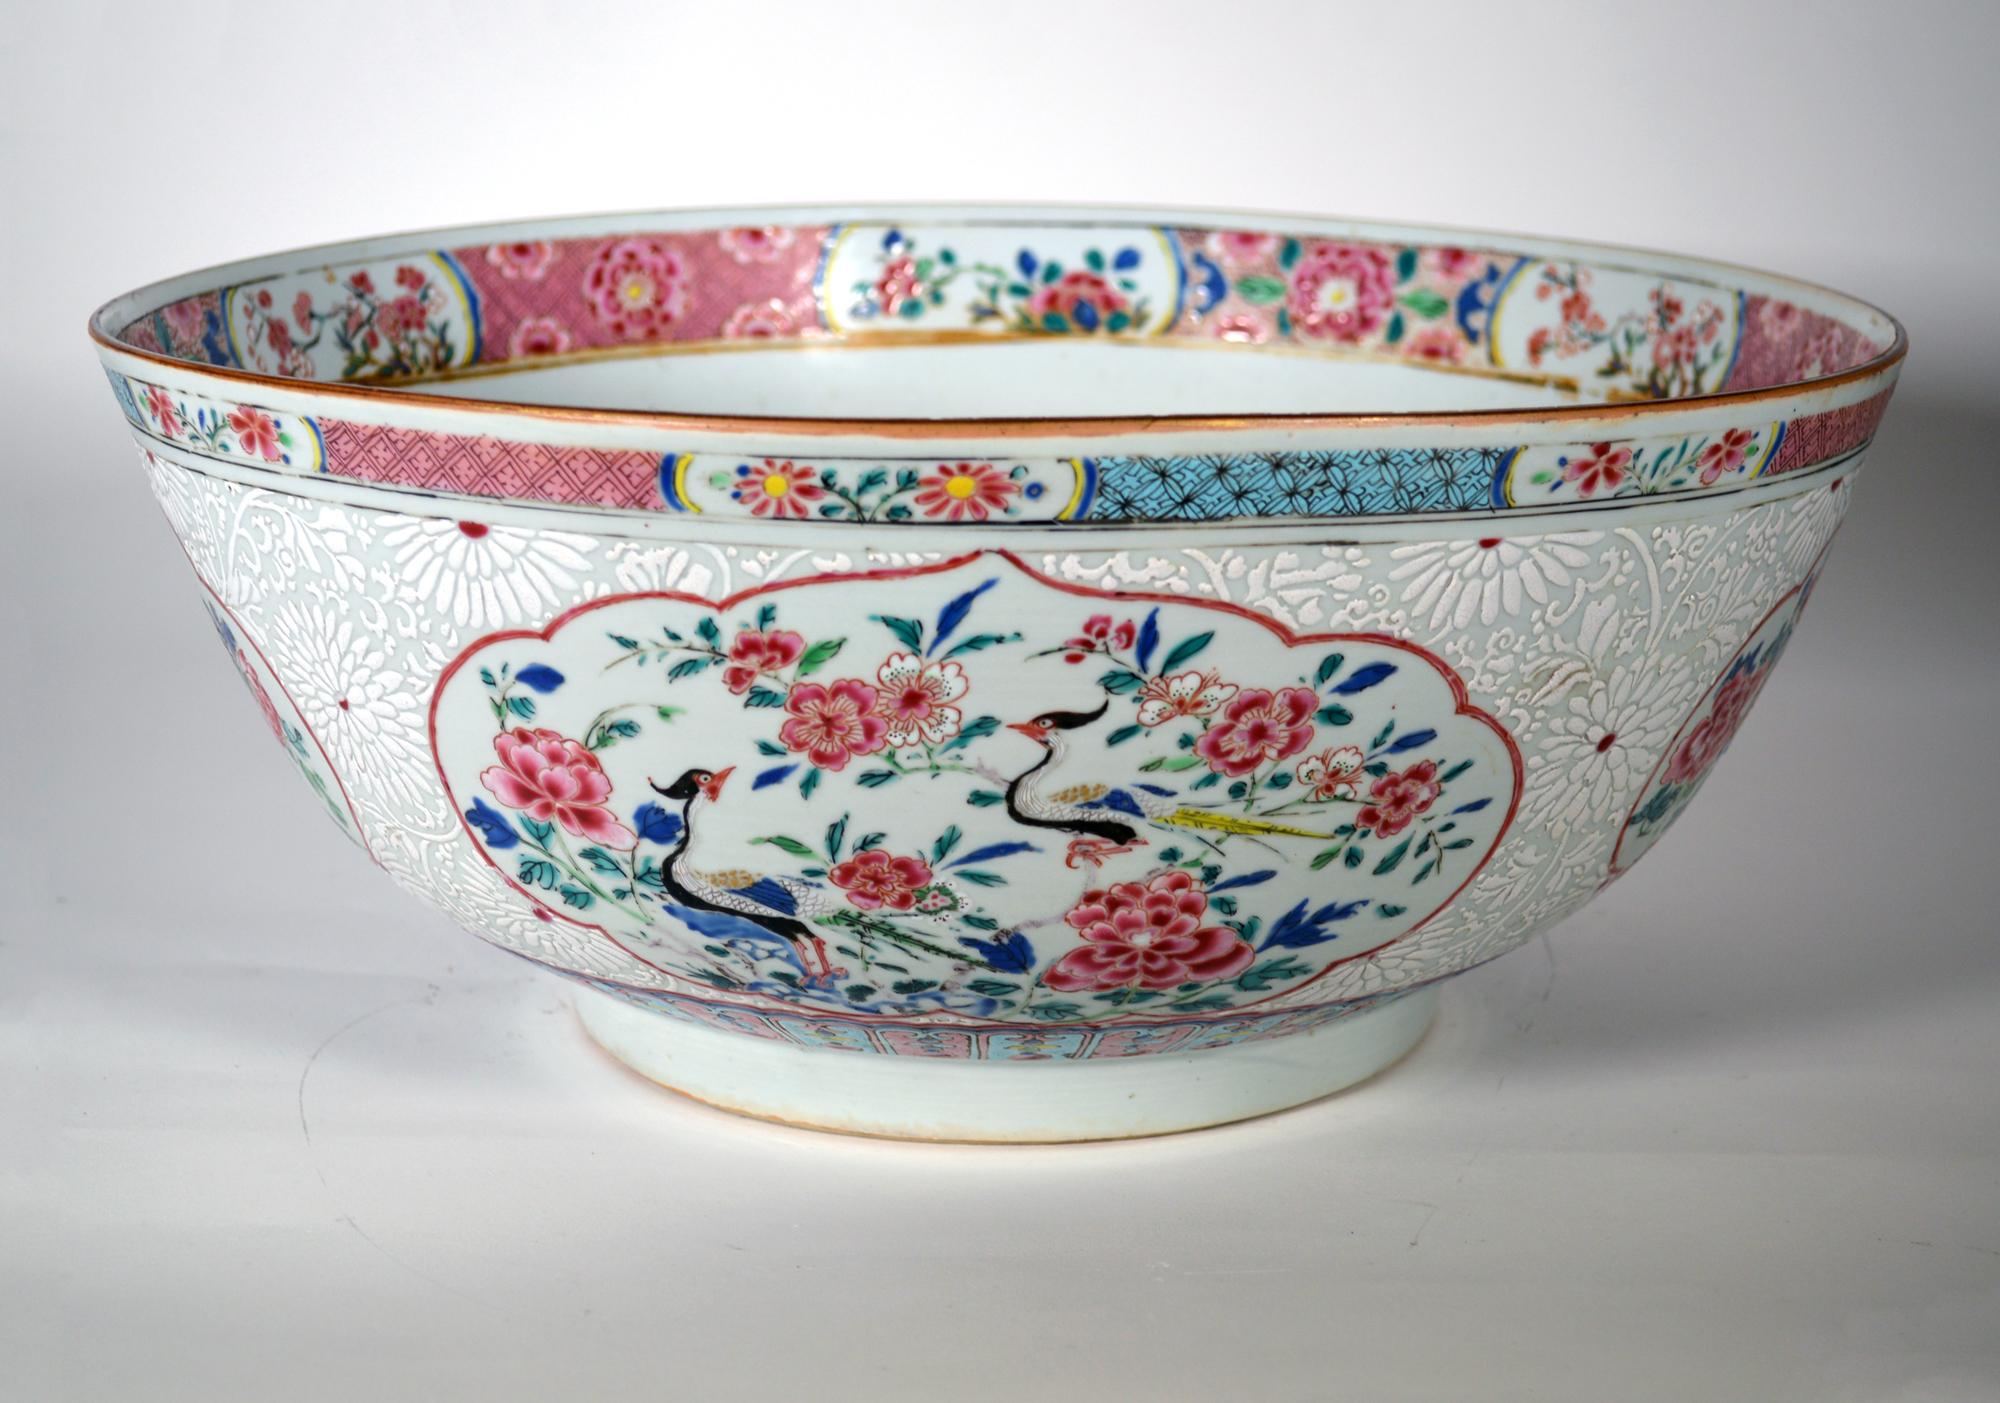 Chinese Export porcelain large Famille Rose punch bowl,
Circa 1765

A superb large Chinese Export famille rose porcelain punch bowl with a Bianca-supra-Bianca ground forming large flower-heads with shaped alternating panels containing exotic